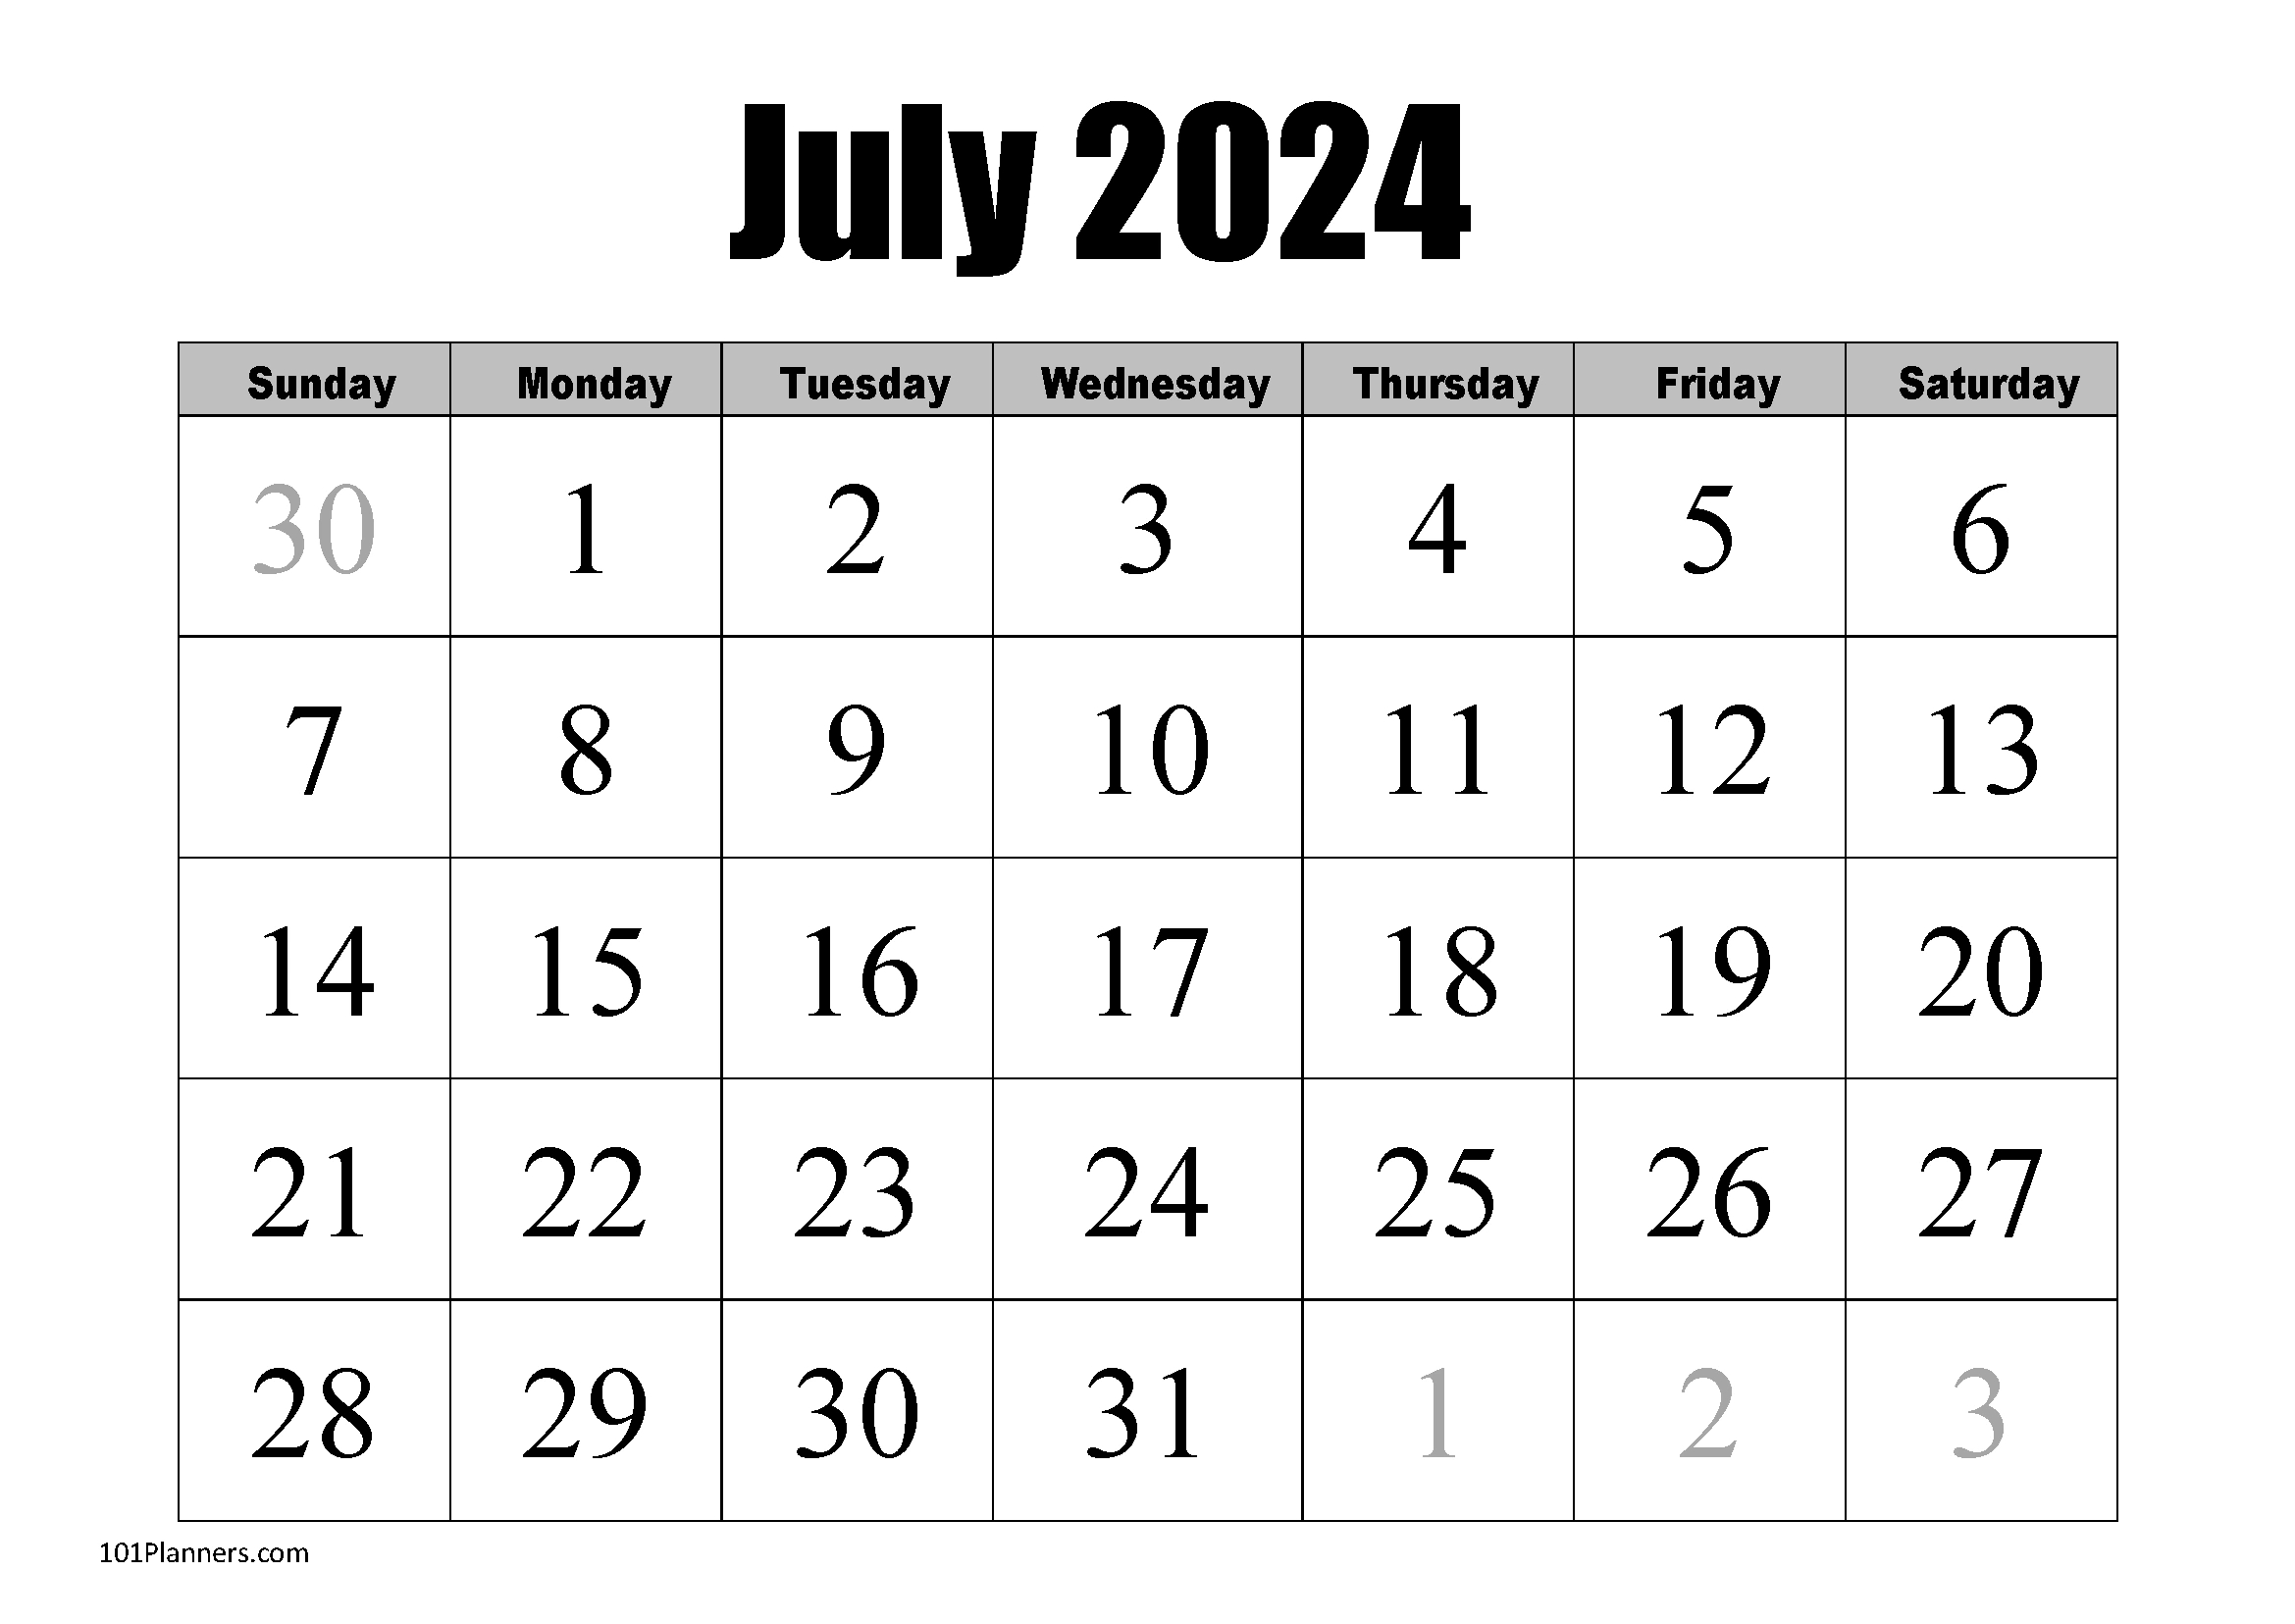 Free Printable July 2024 Calendar | Customize Online pertaining to July 2024 Calendar Copy and Paste